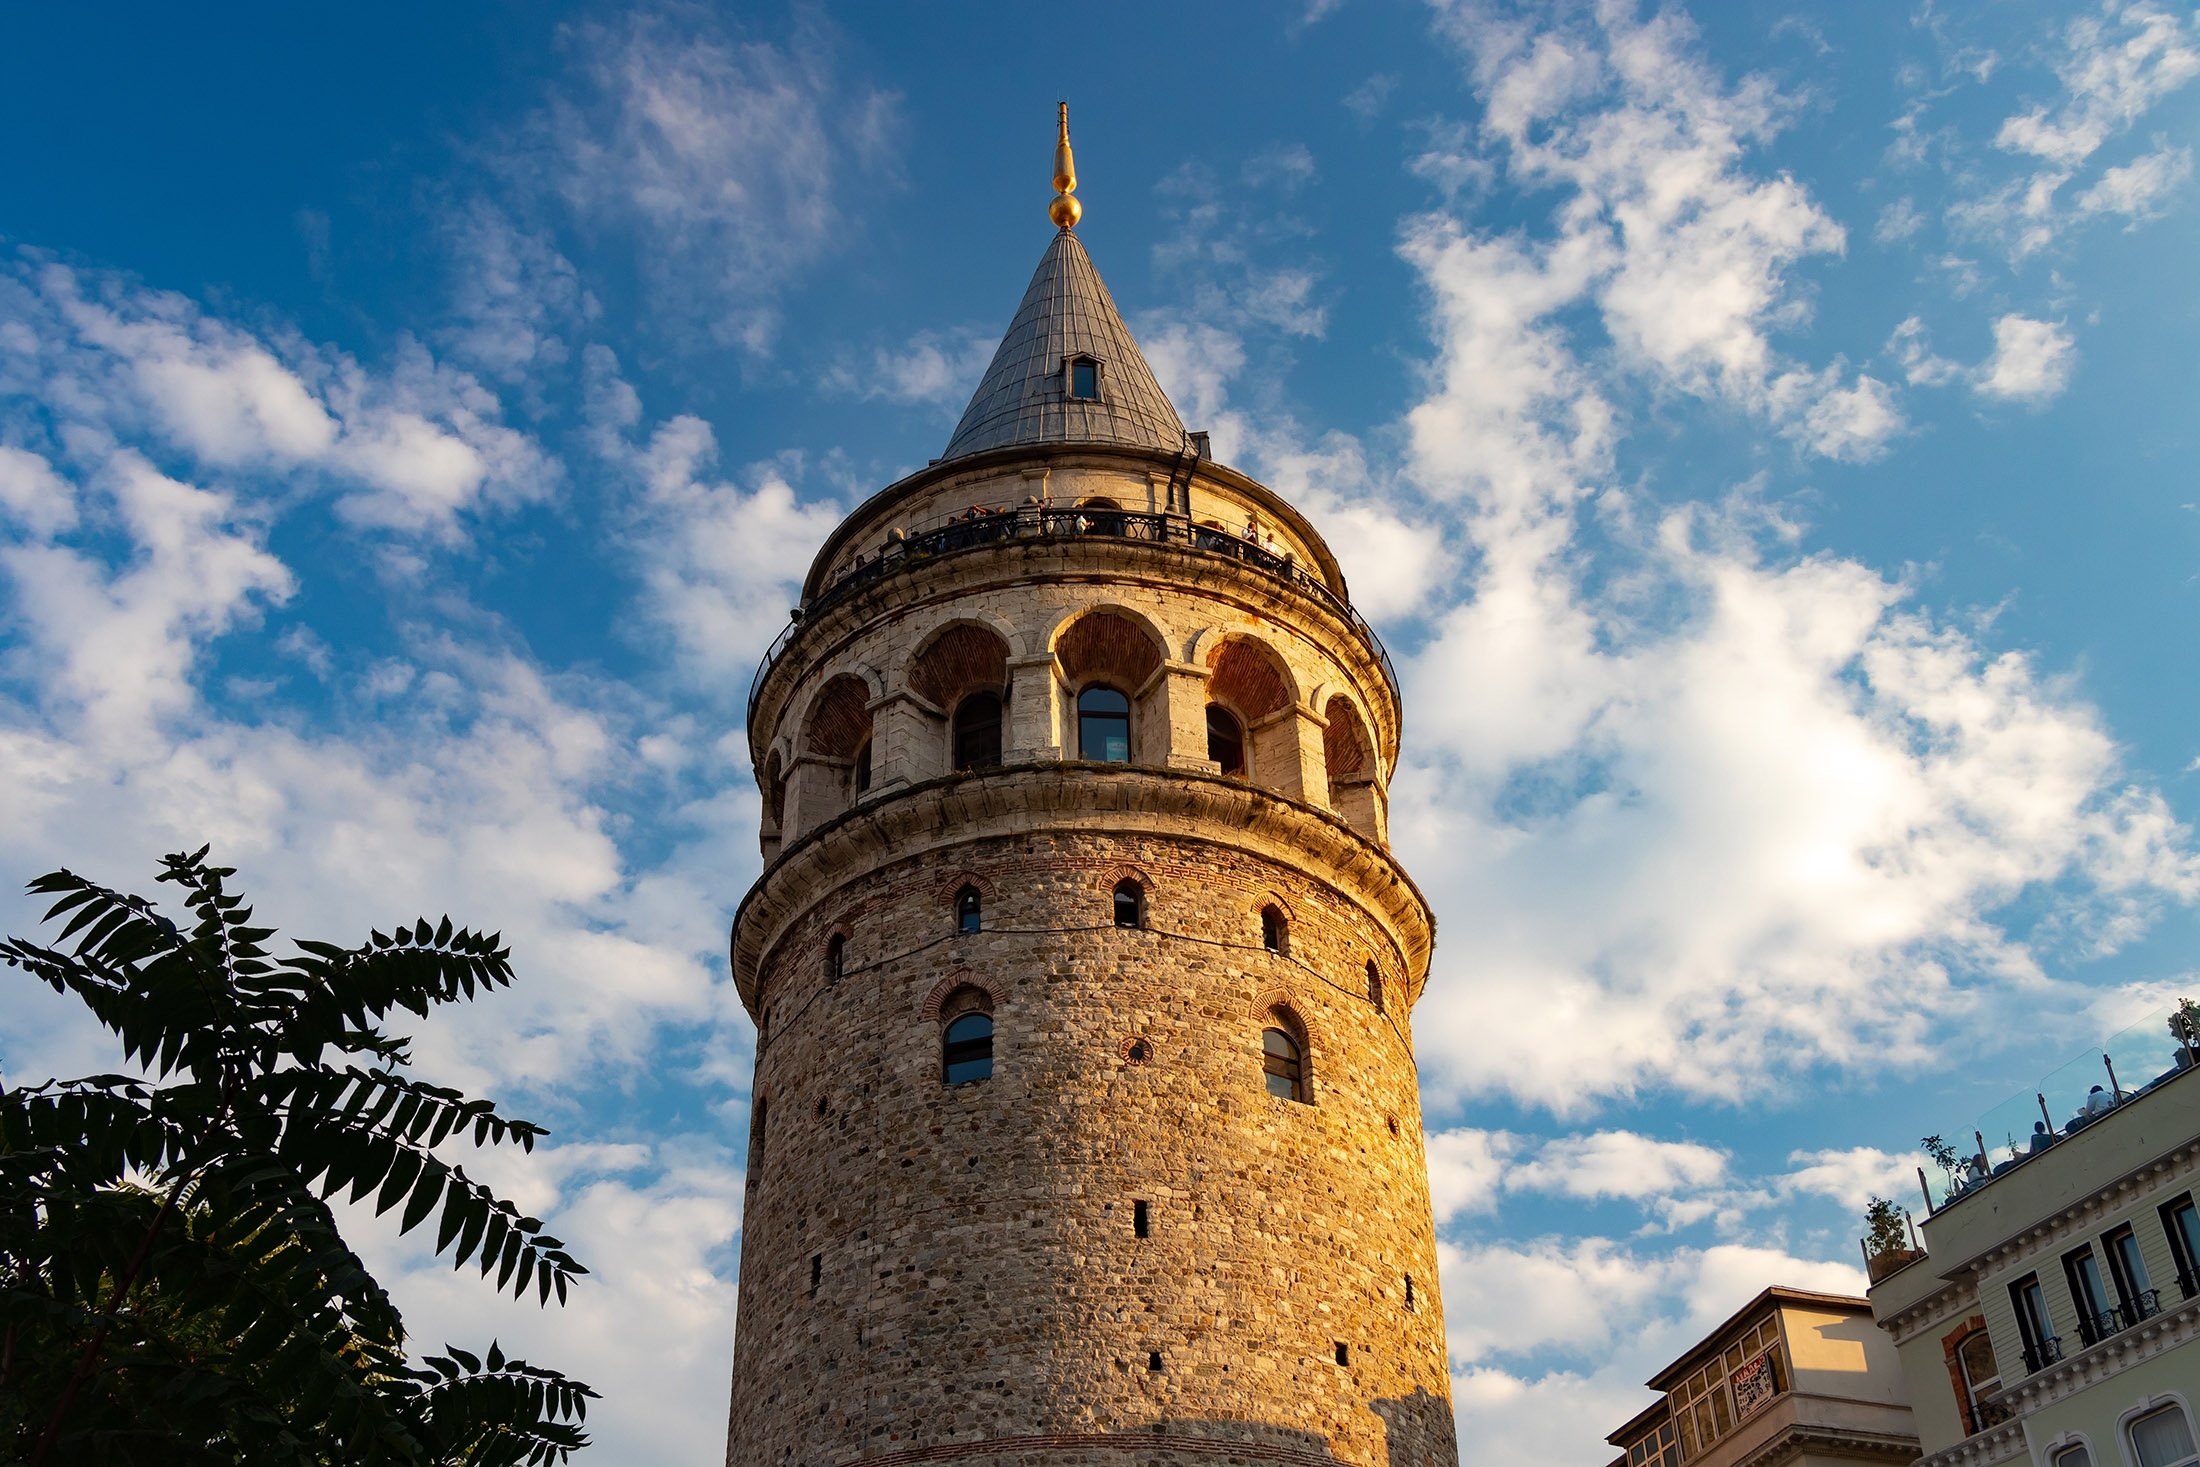 places to visit when in istanbul